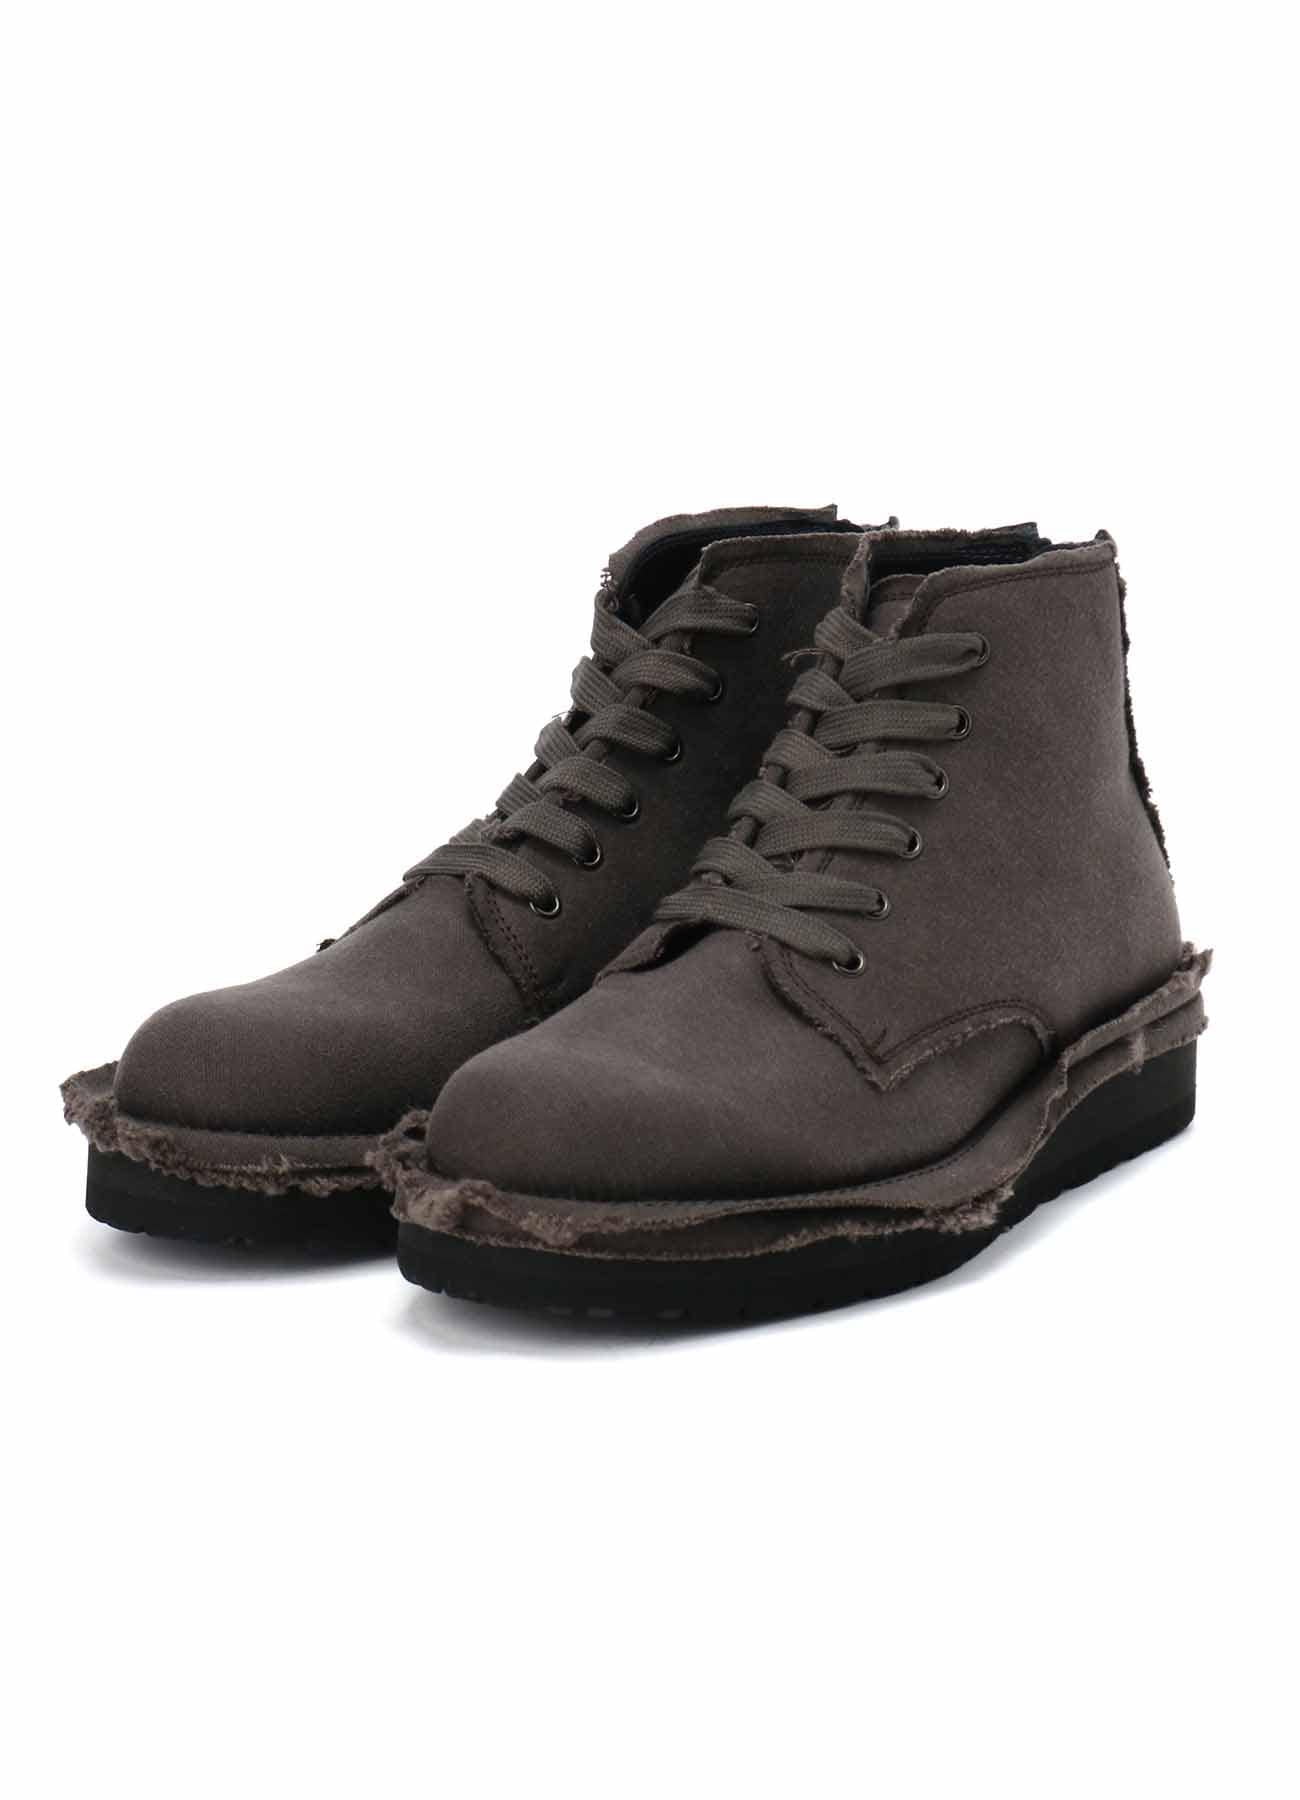 WHIPCORD LACE UP BOOTS WITH ZIP	